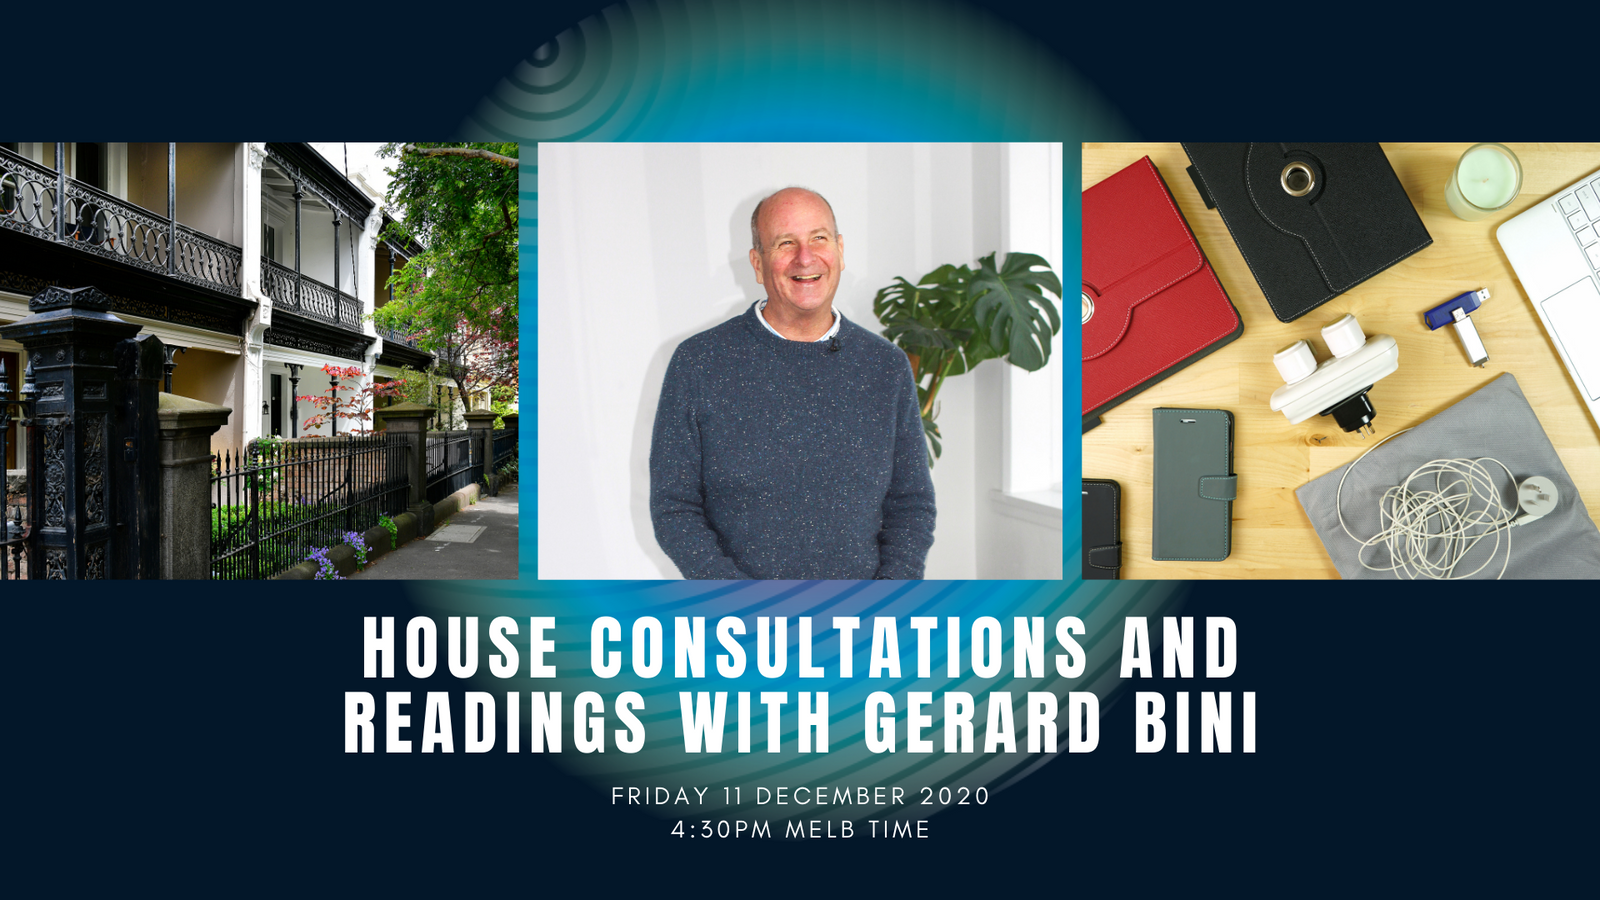 House consultations and readings with Gerard Bini